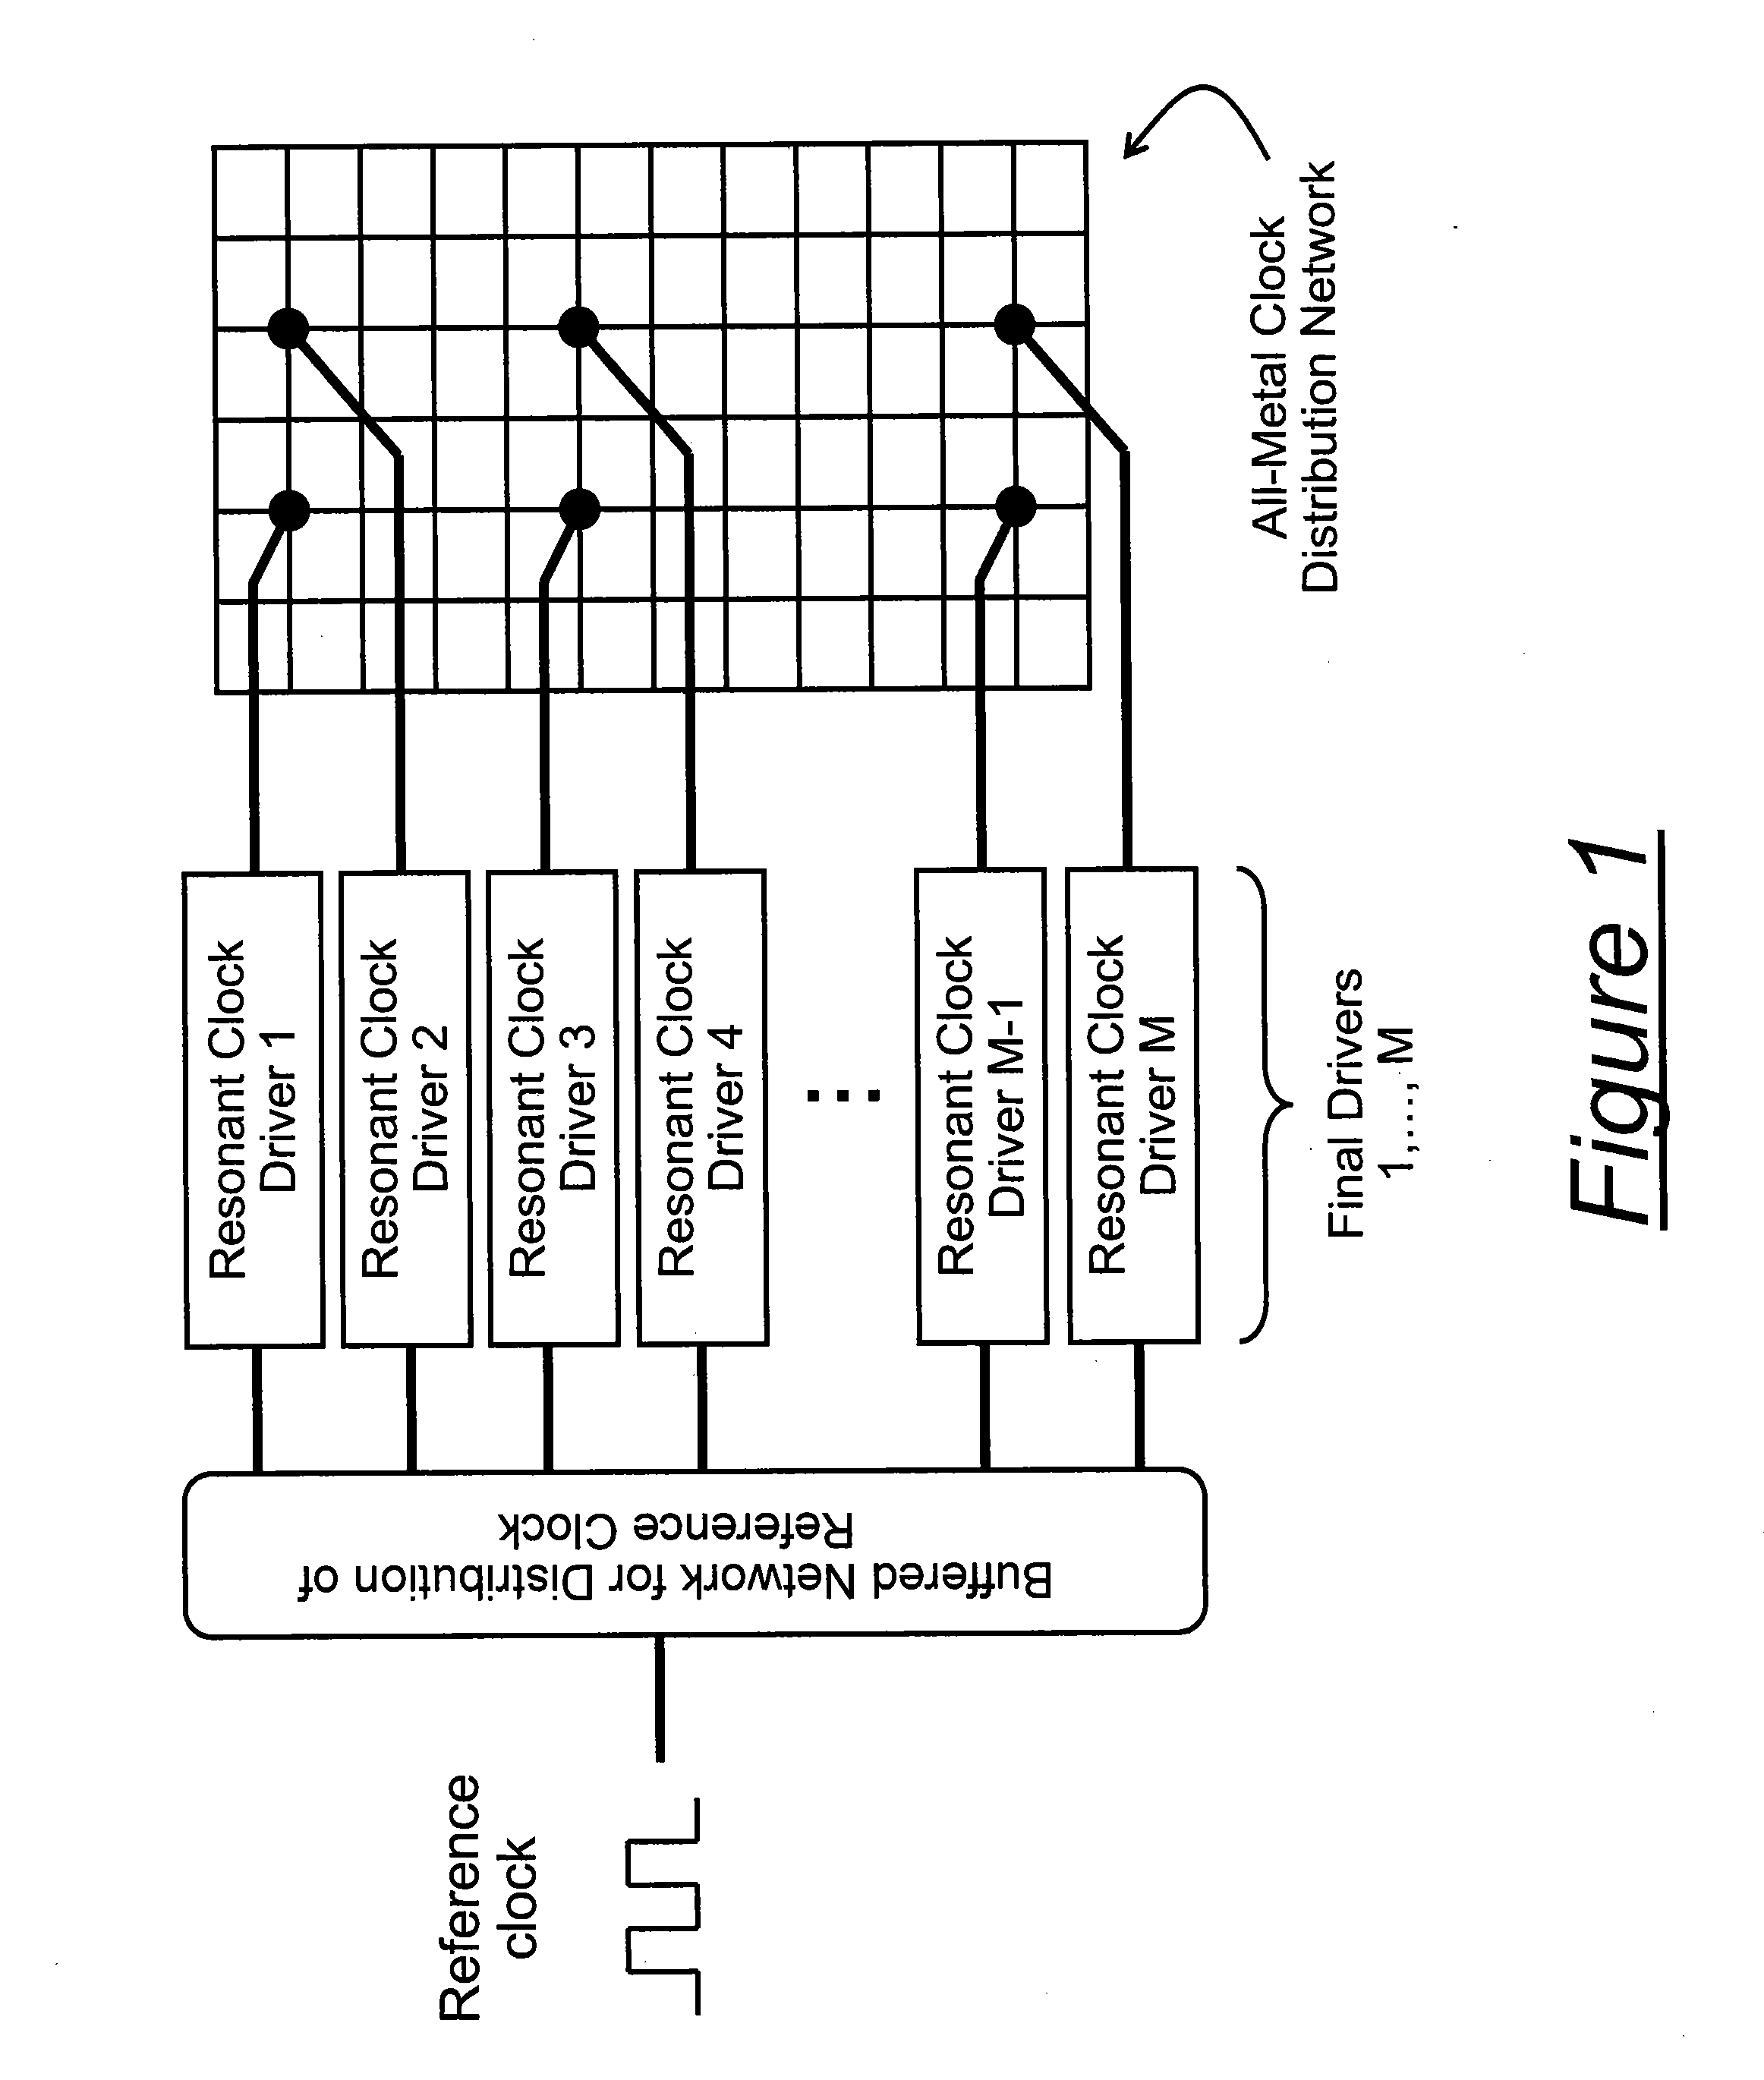 Architecture for operating resonant clock network in conventional mode